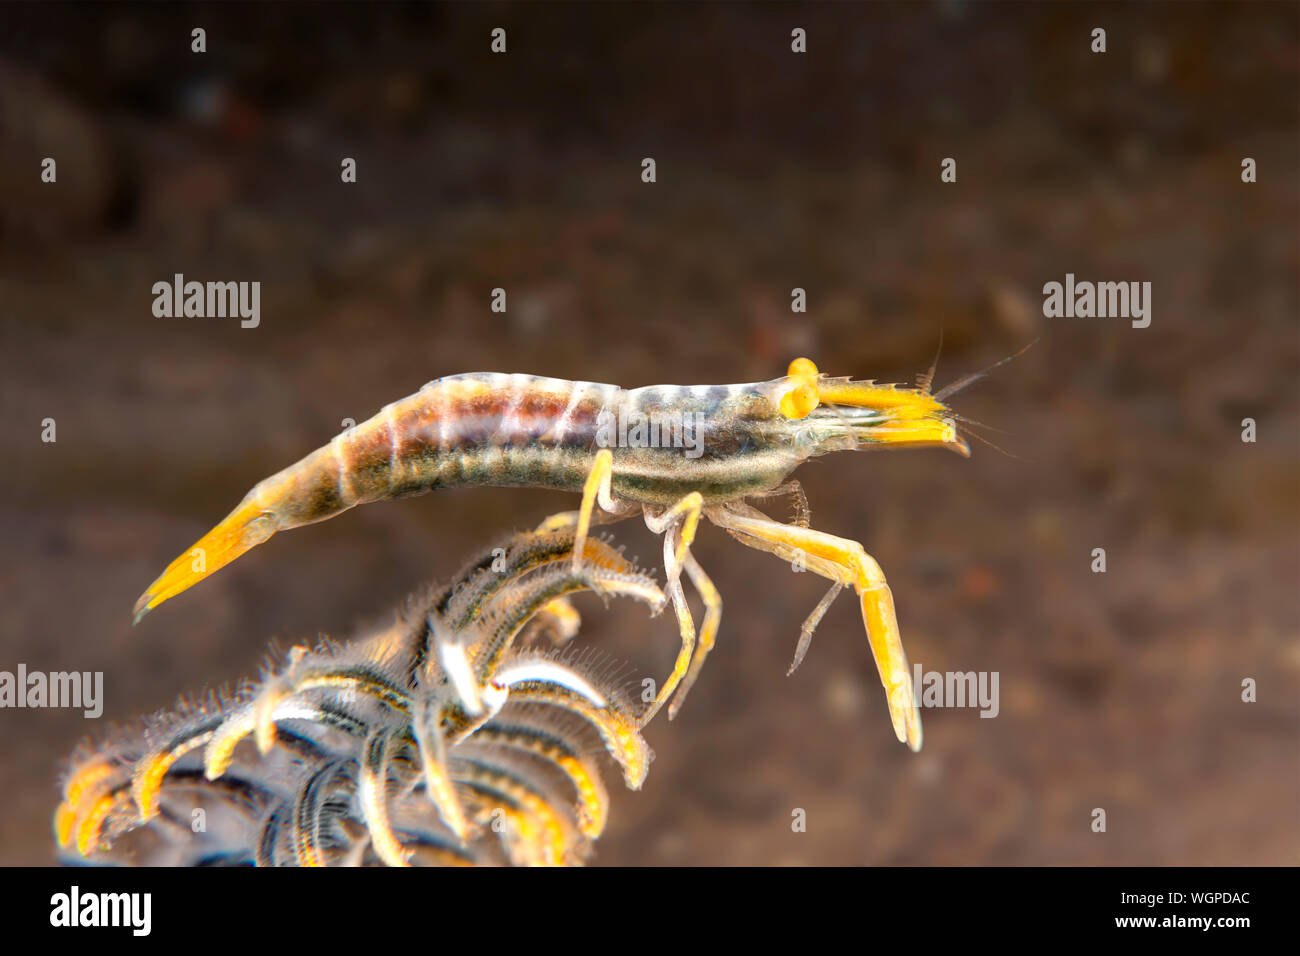 A yellow crinoid shrimp clings to the arm of its crinoid host in search of planktonic food. Stock Photo